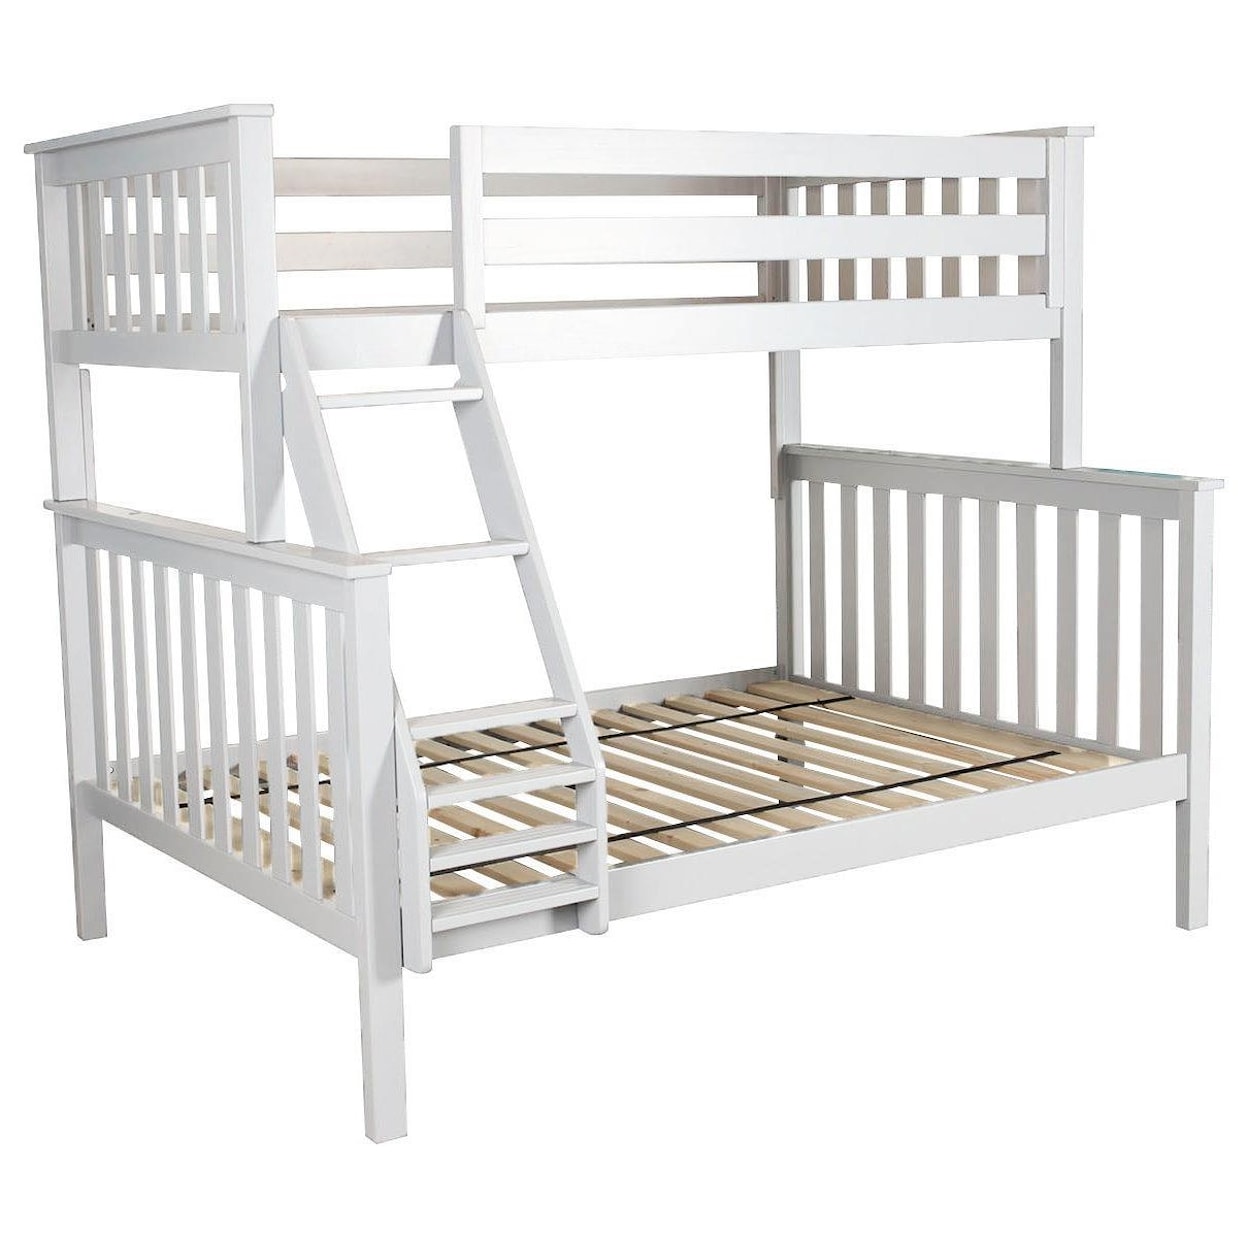 Jackpot Kids Bunk Beds Kent Twin/Full Bunk Bed in White